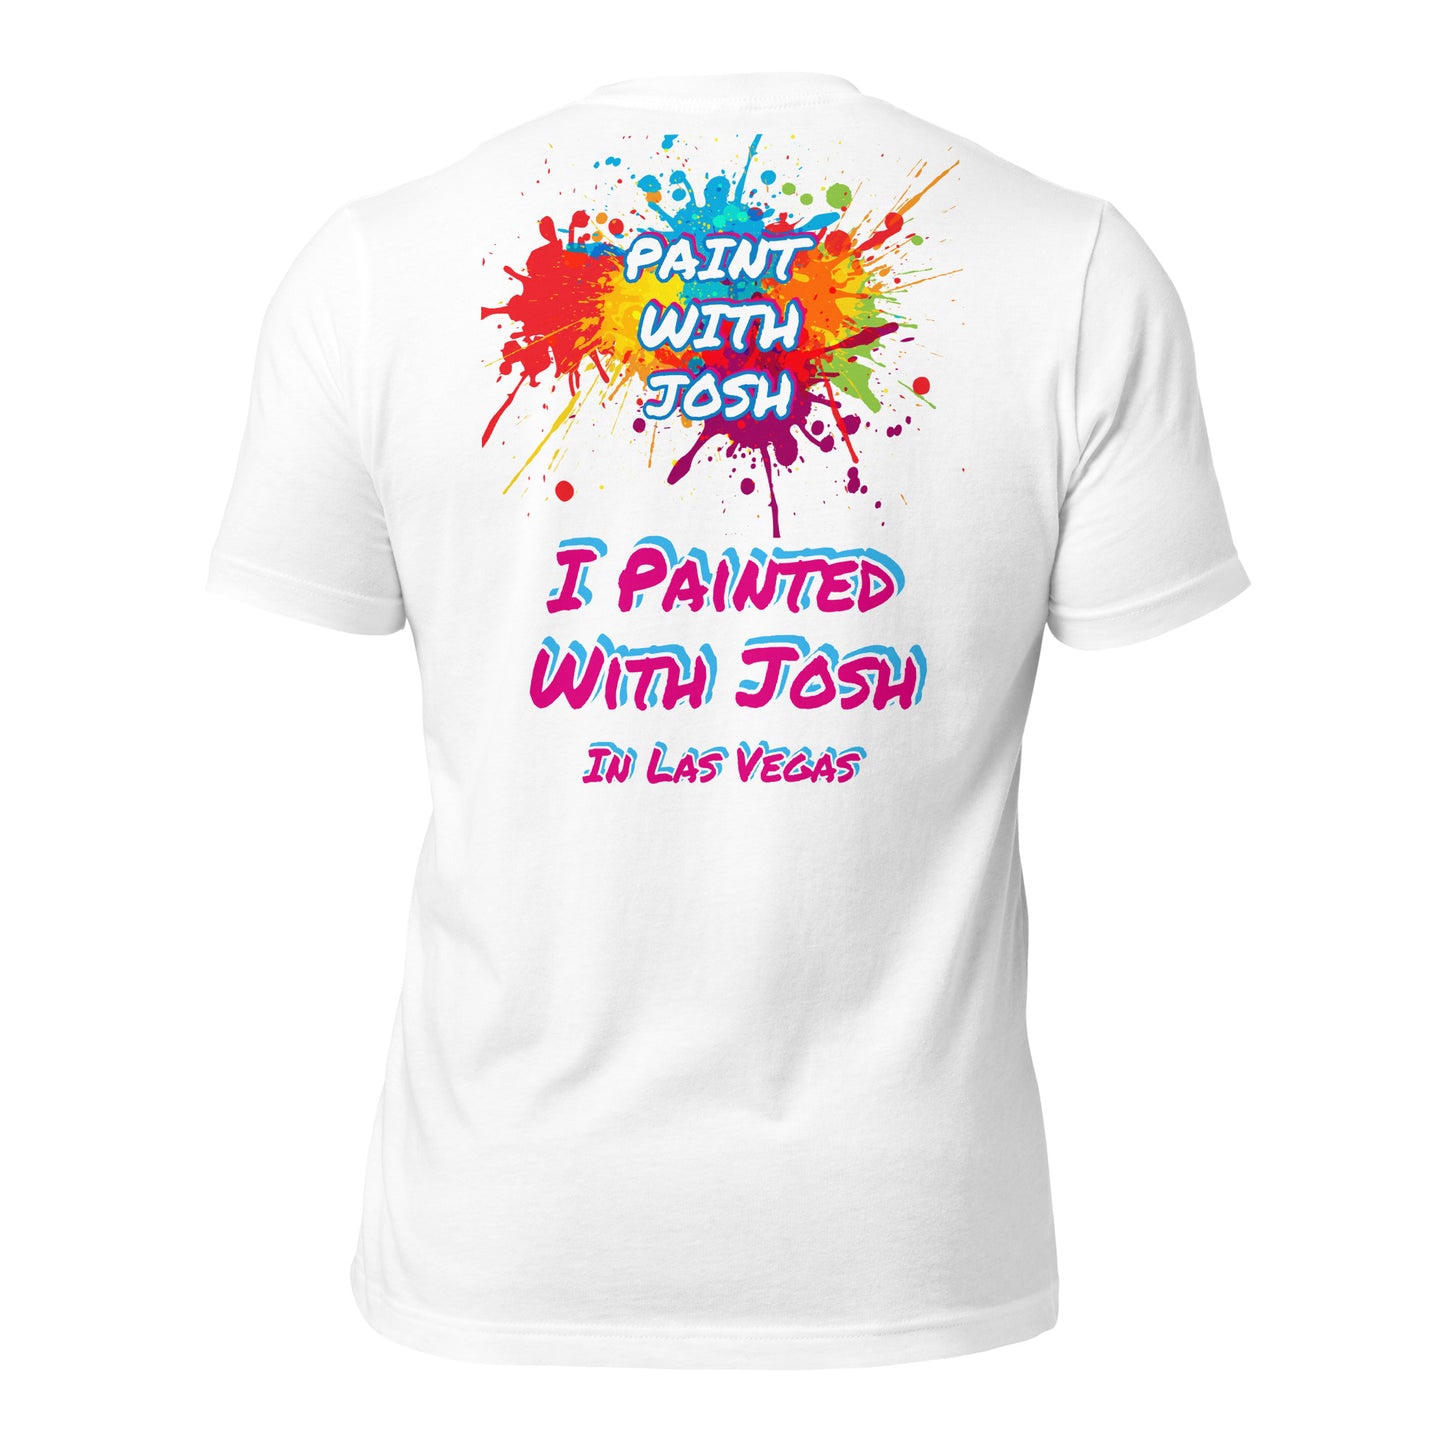 I Painted With Josh in Las Vegas Unisex t-shirt by PaintWithJosh